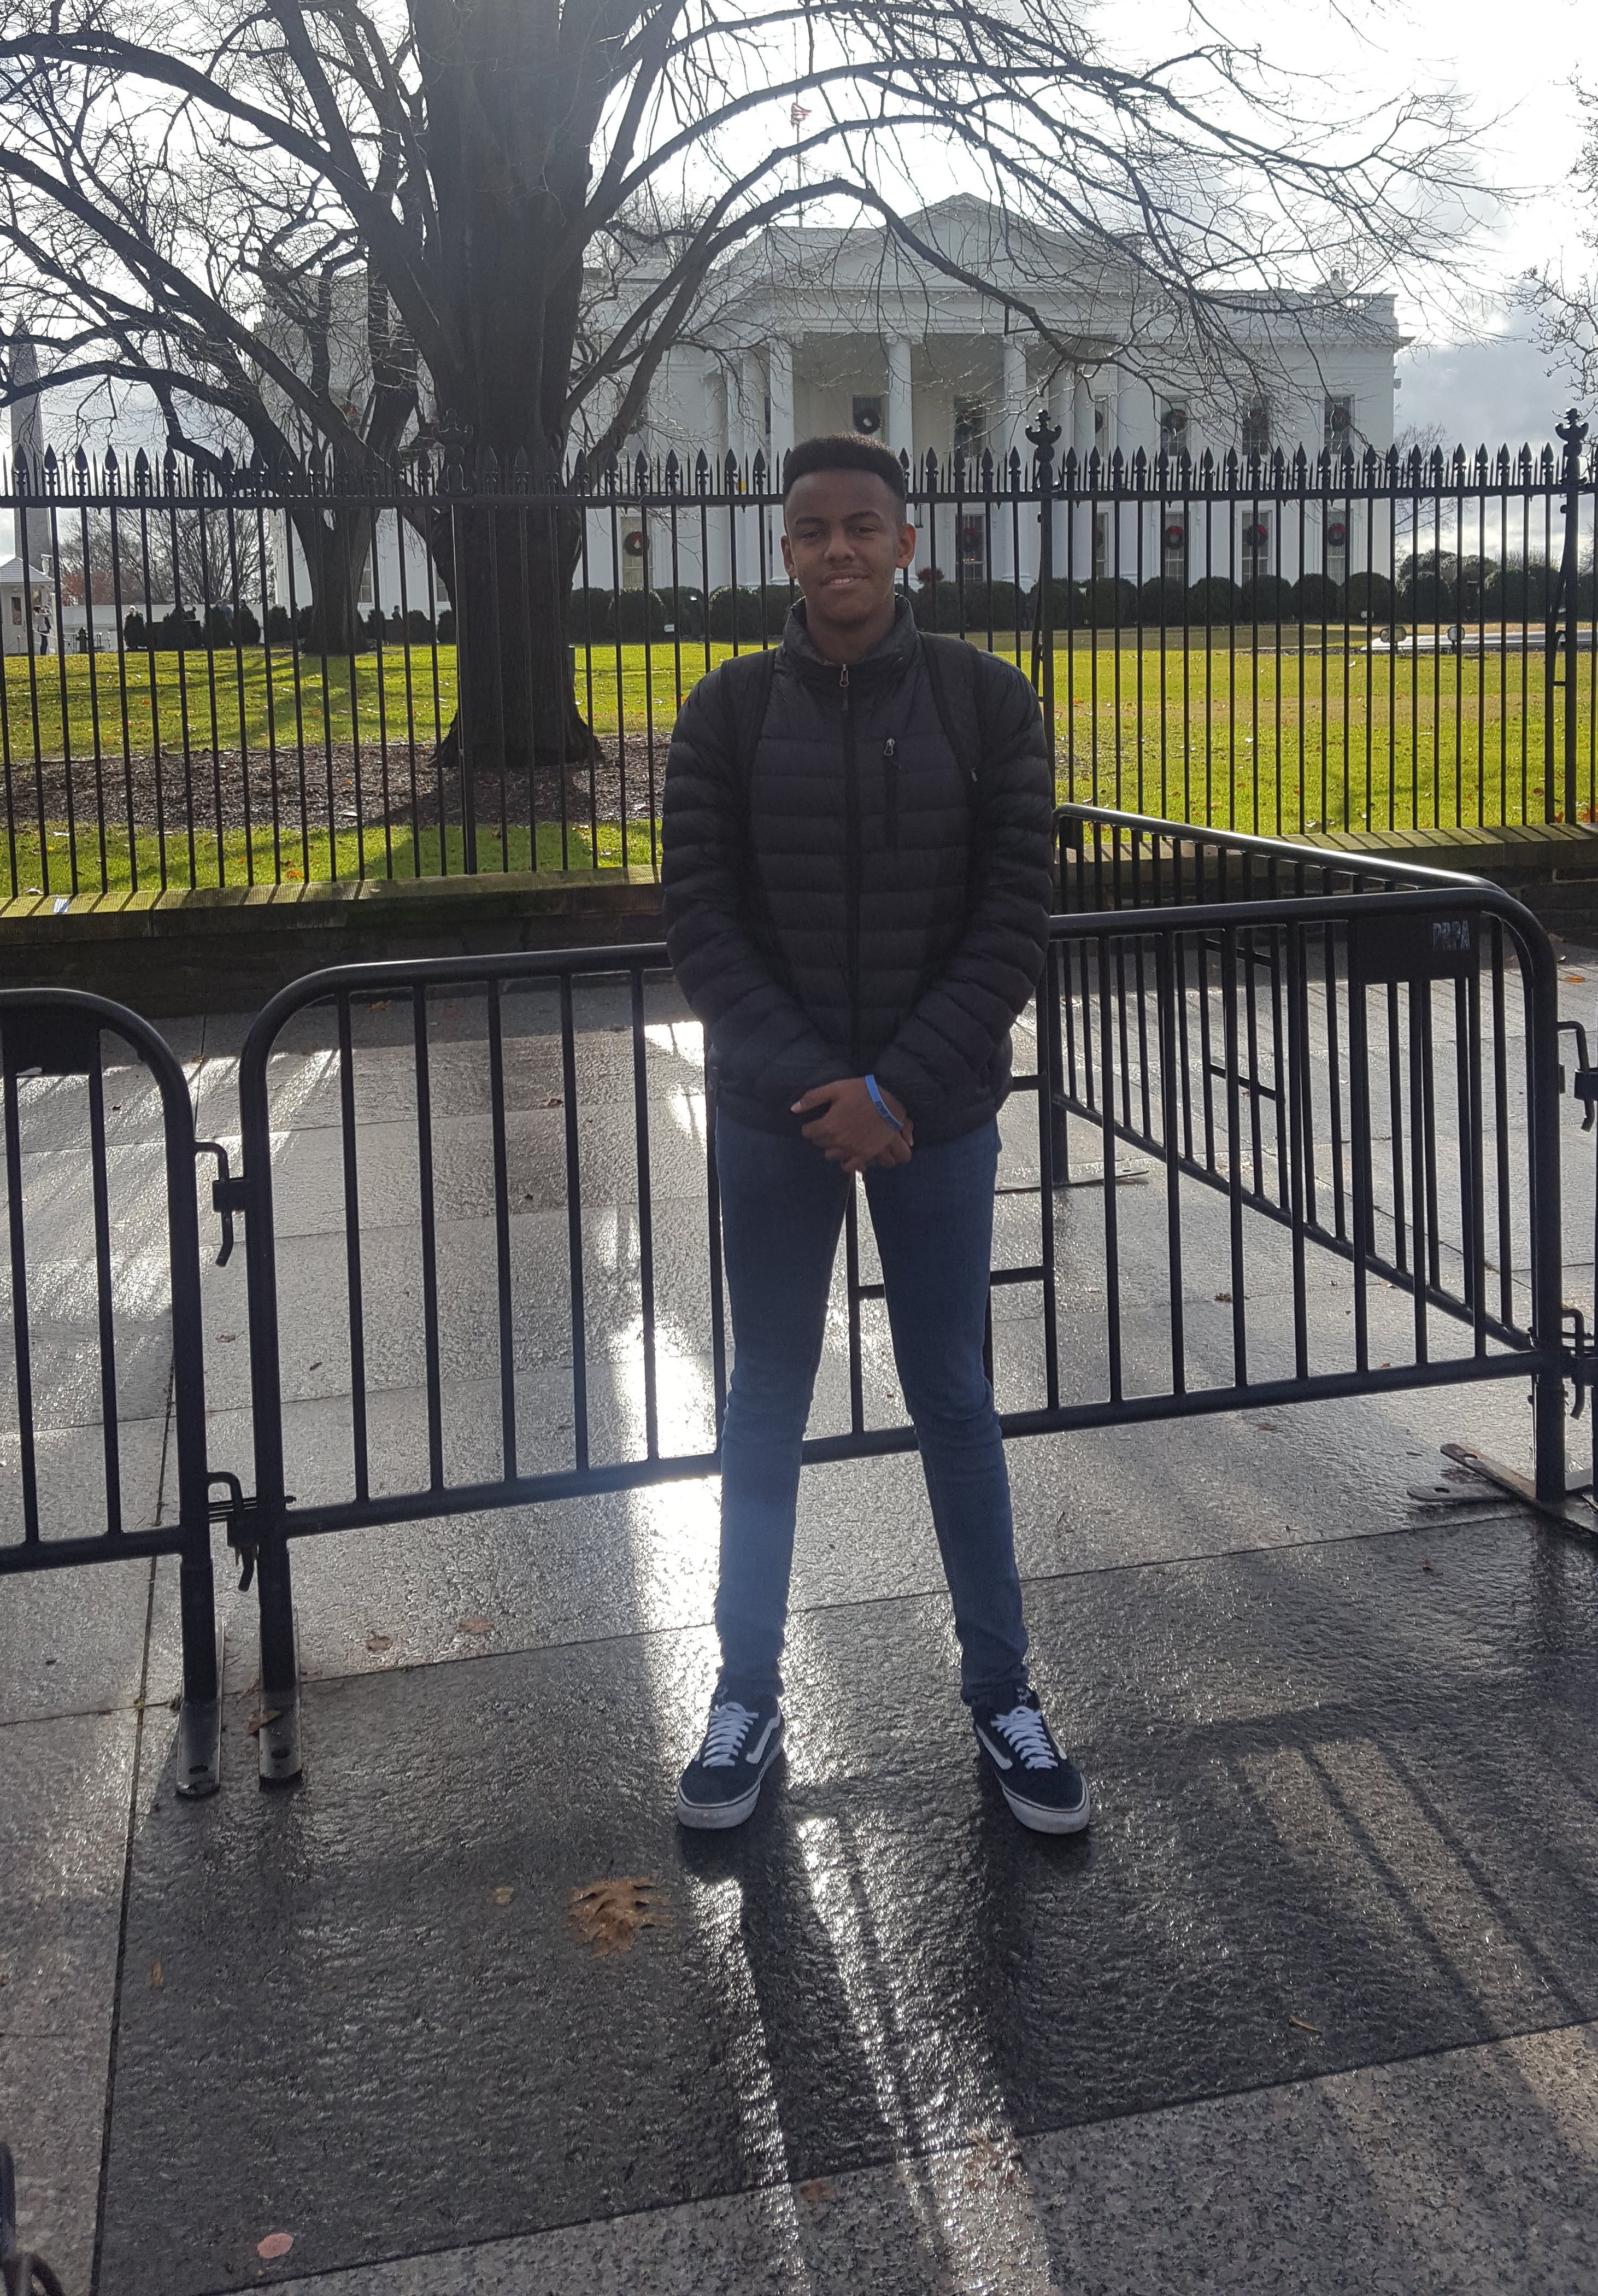 Brook in front of the White House